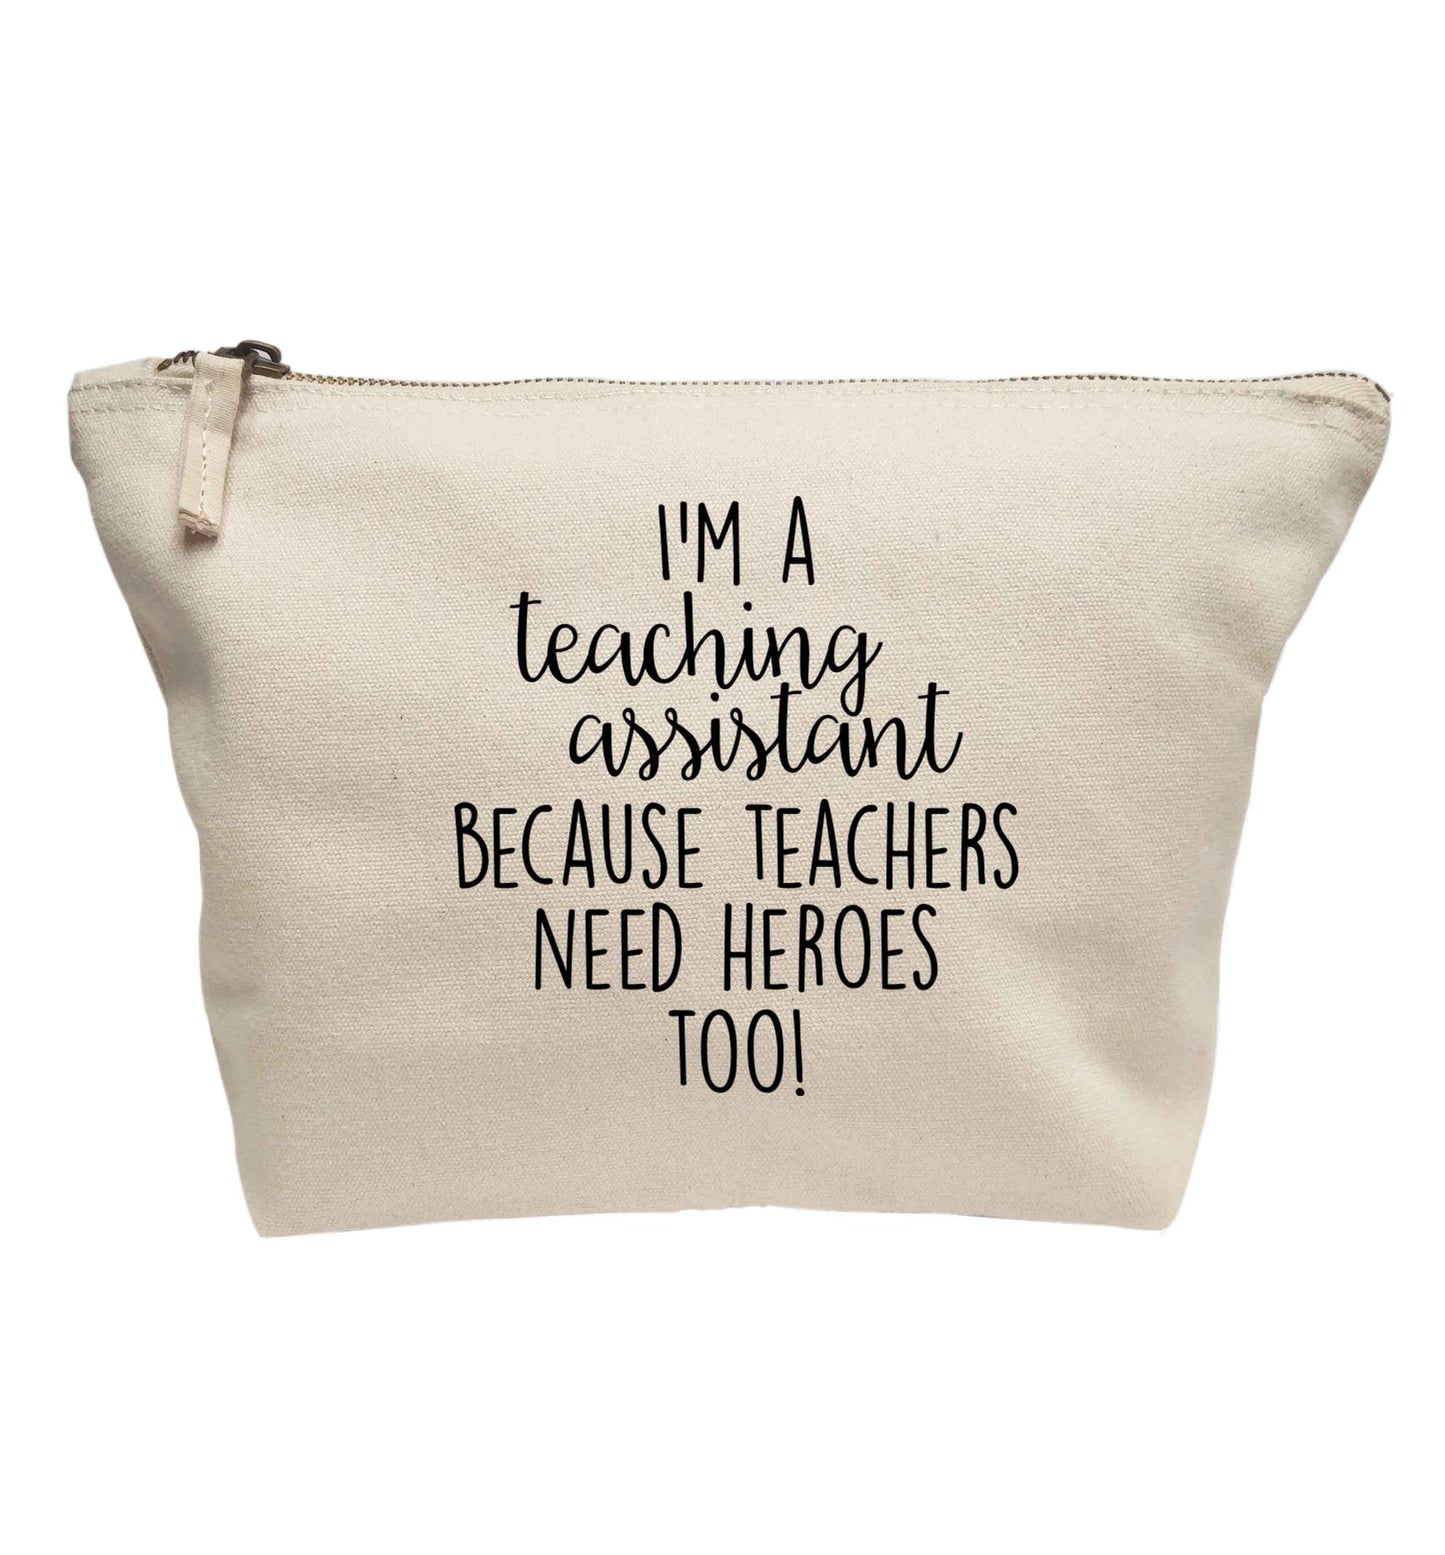 I'm a teaching assistant because teachers need heroes too! | Makeup / wash bag